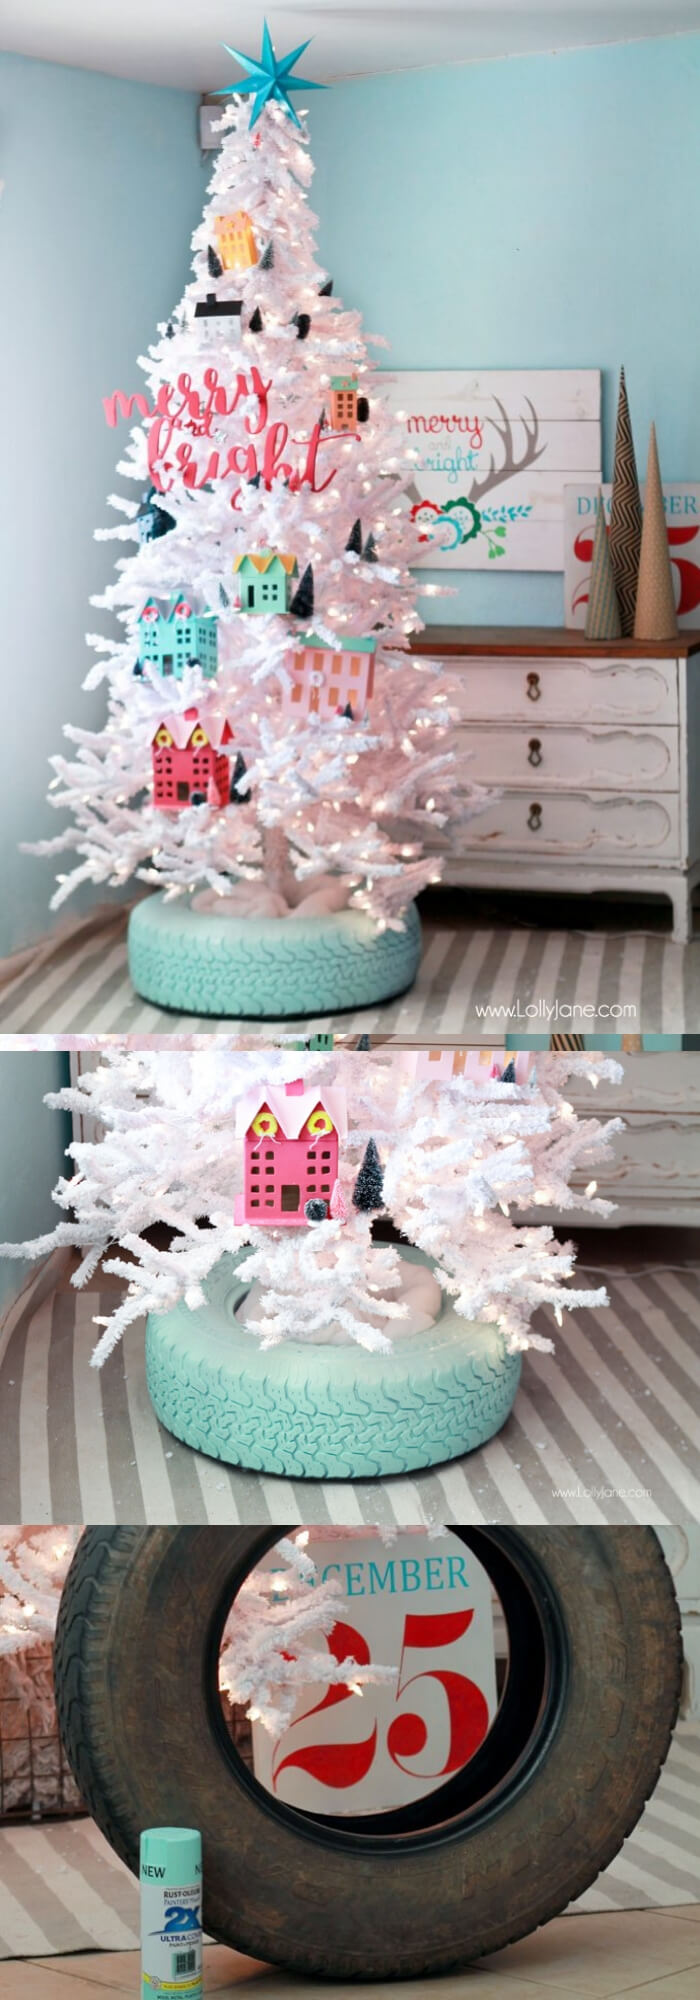 Recycled Tire Christmas Tree Base | Best Recycled Tire Christmas Decoration Ideas | FarmFoodFamily.com